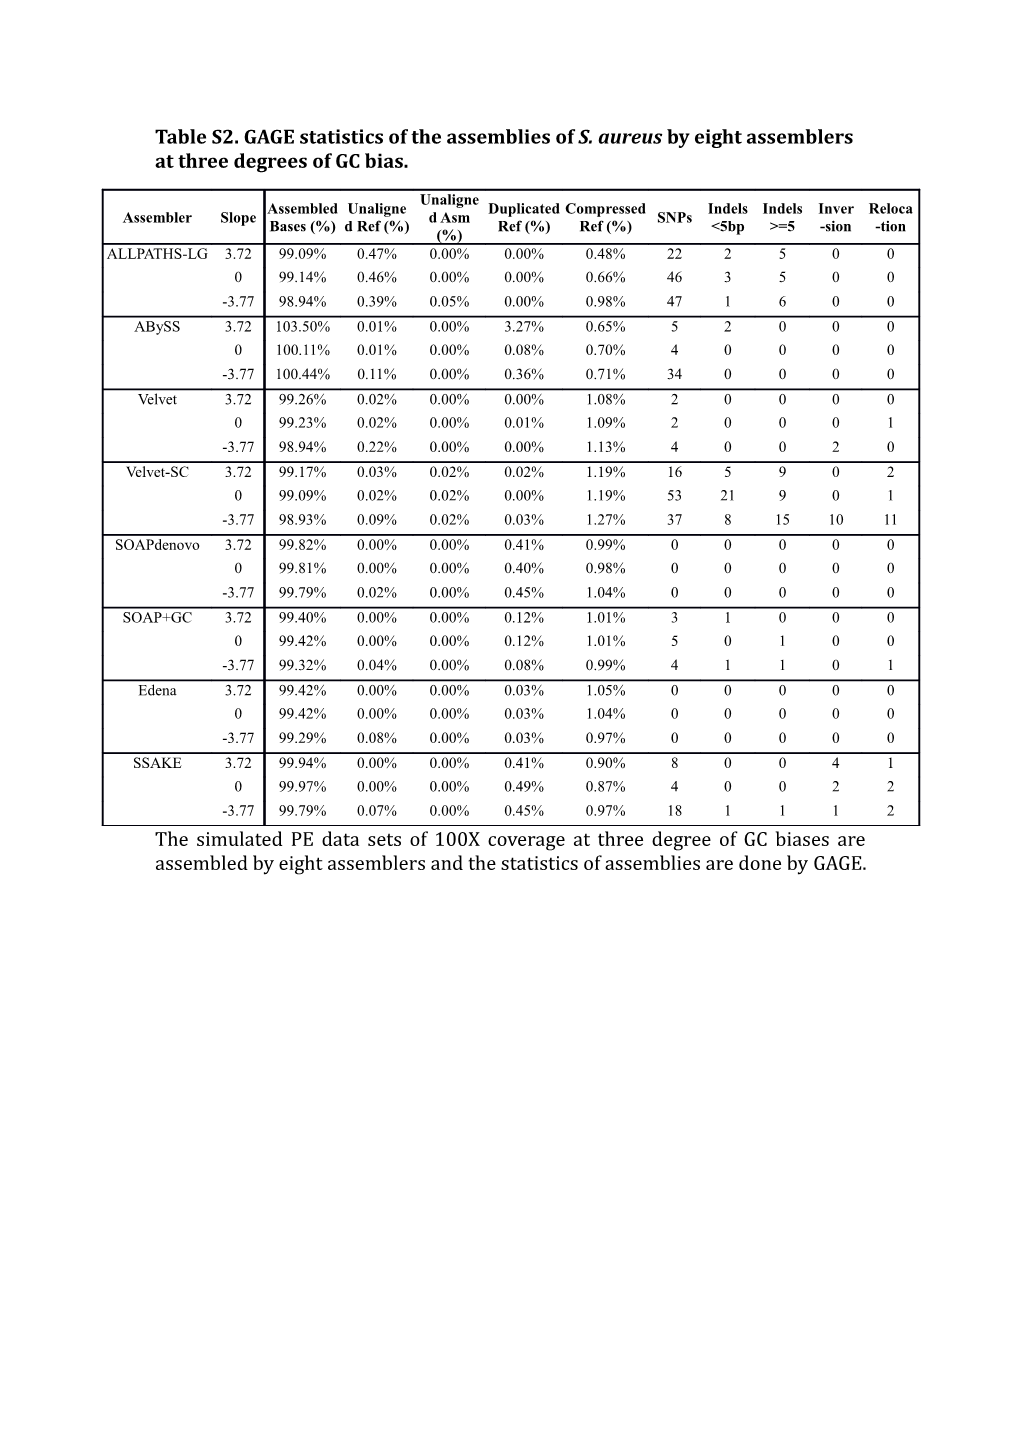 Table S2. GAGE Statistics of the Assemblies of S. Aureus by Eight Assemblers at Three